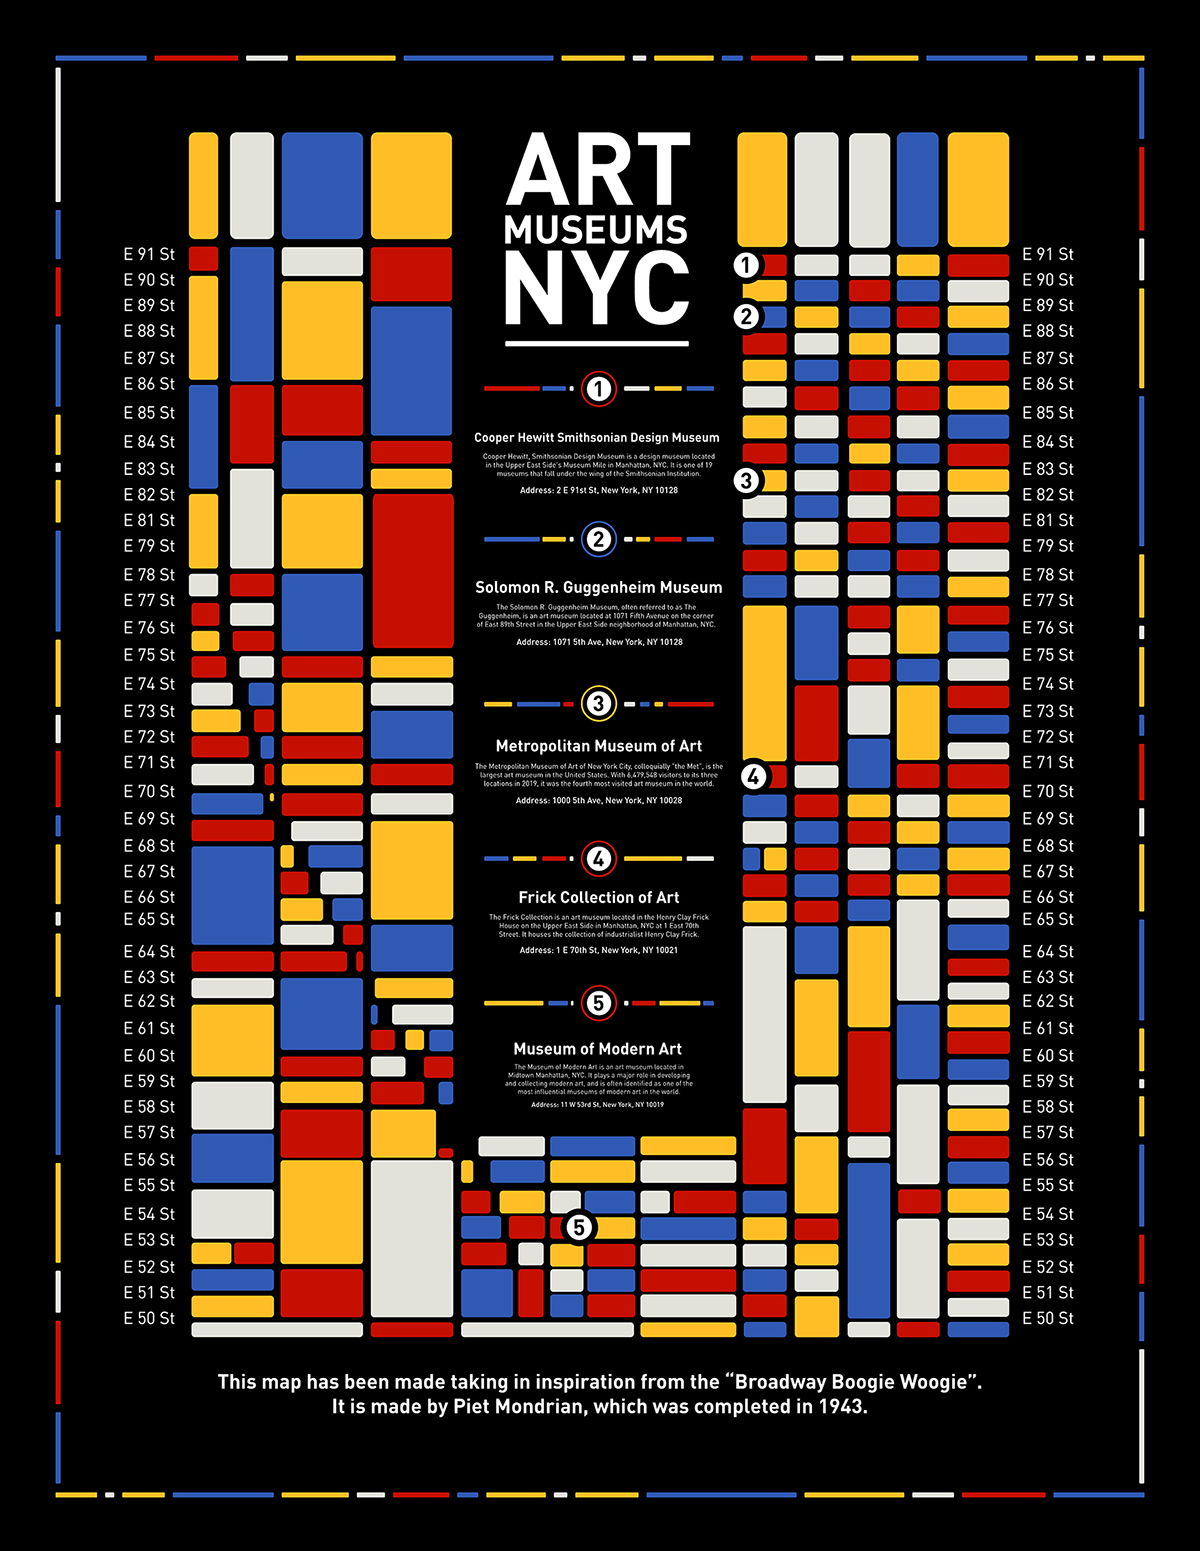 A poster displaying prominent art museums in New York City.